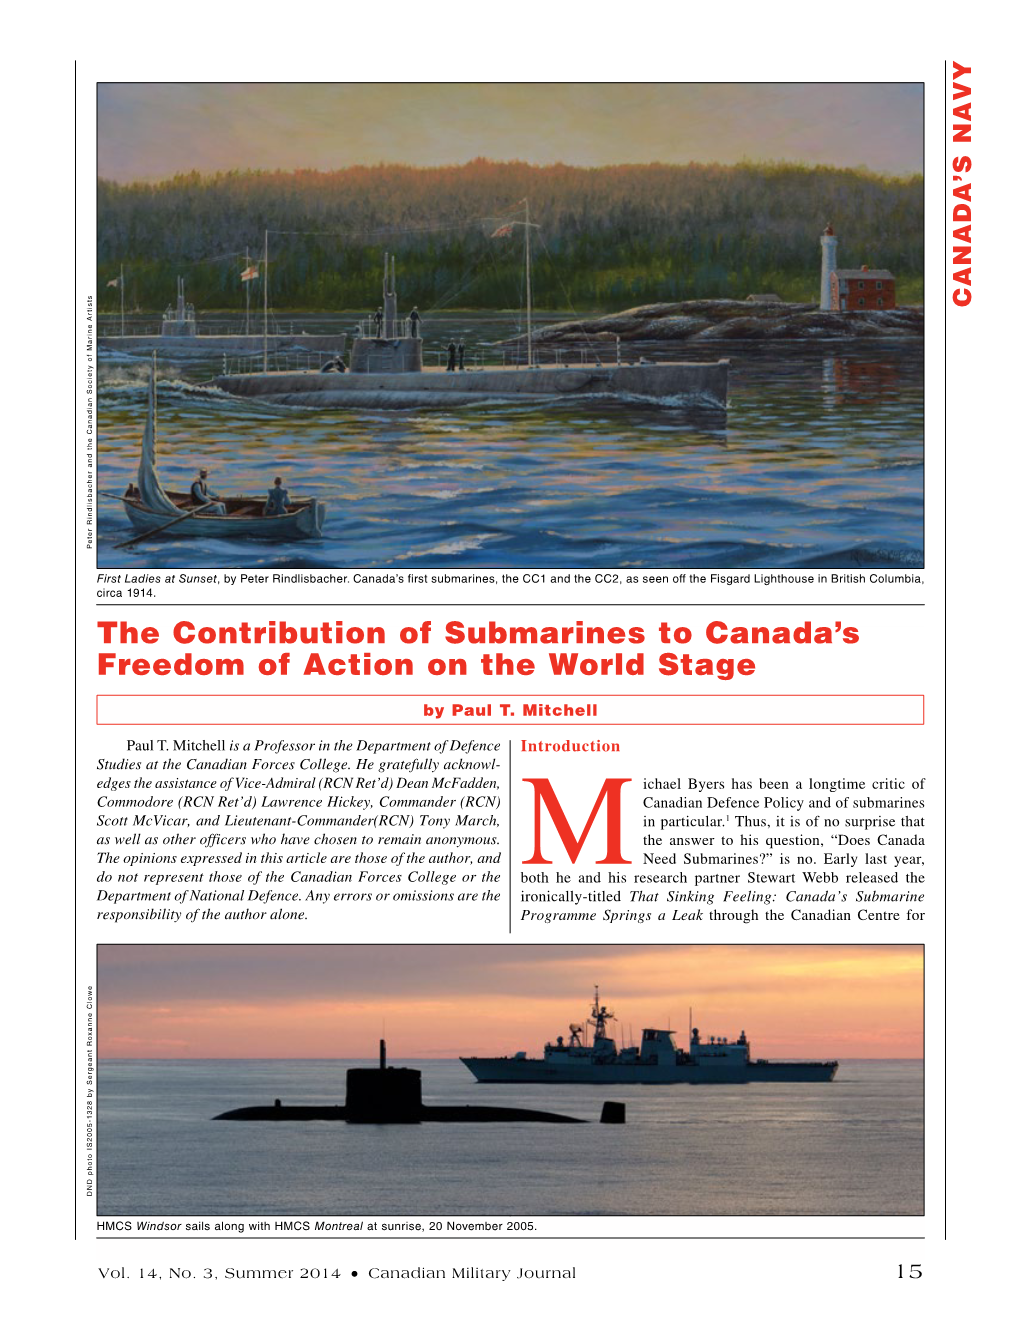 The Contribution of Submarines to Canada's Freedom of Action on The